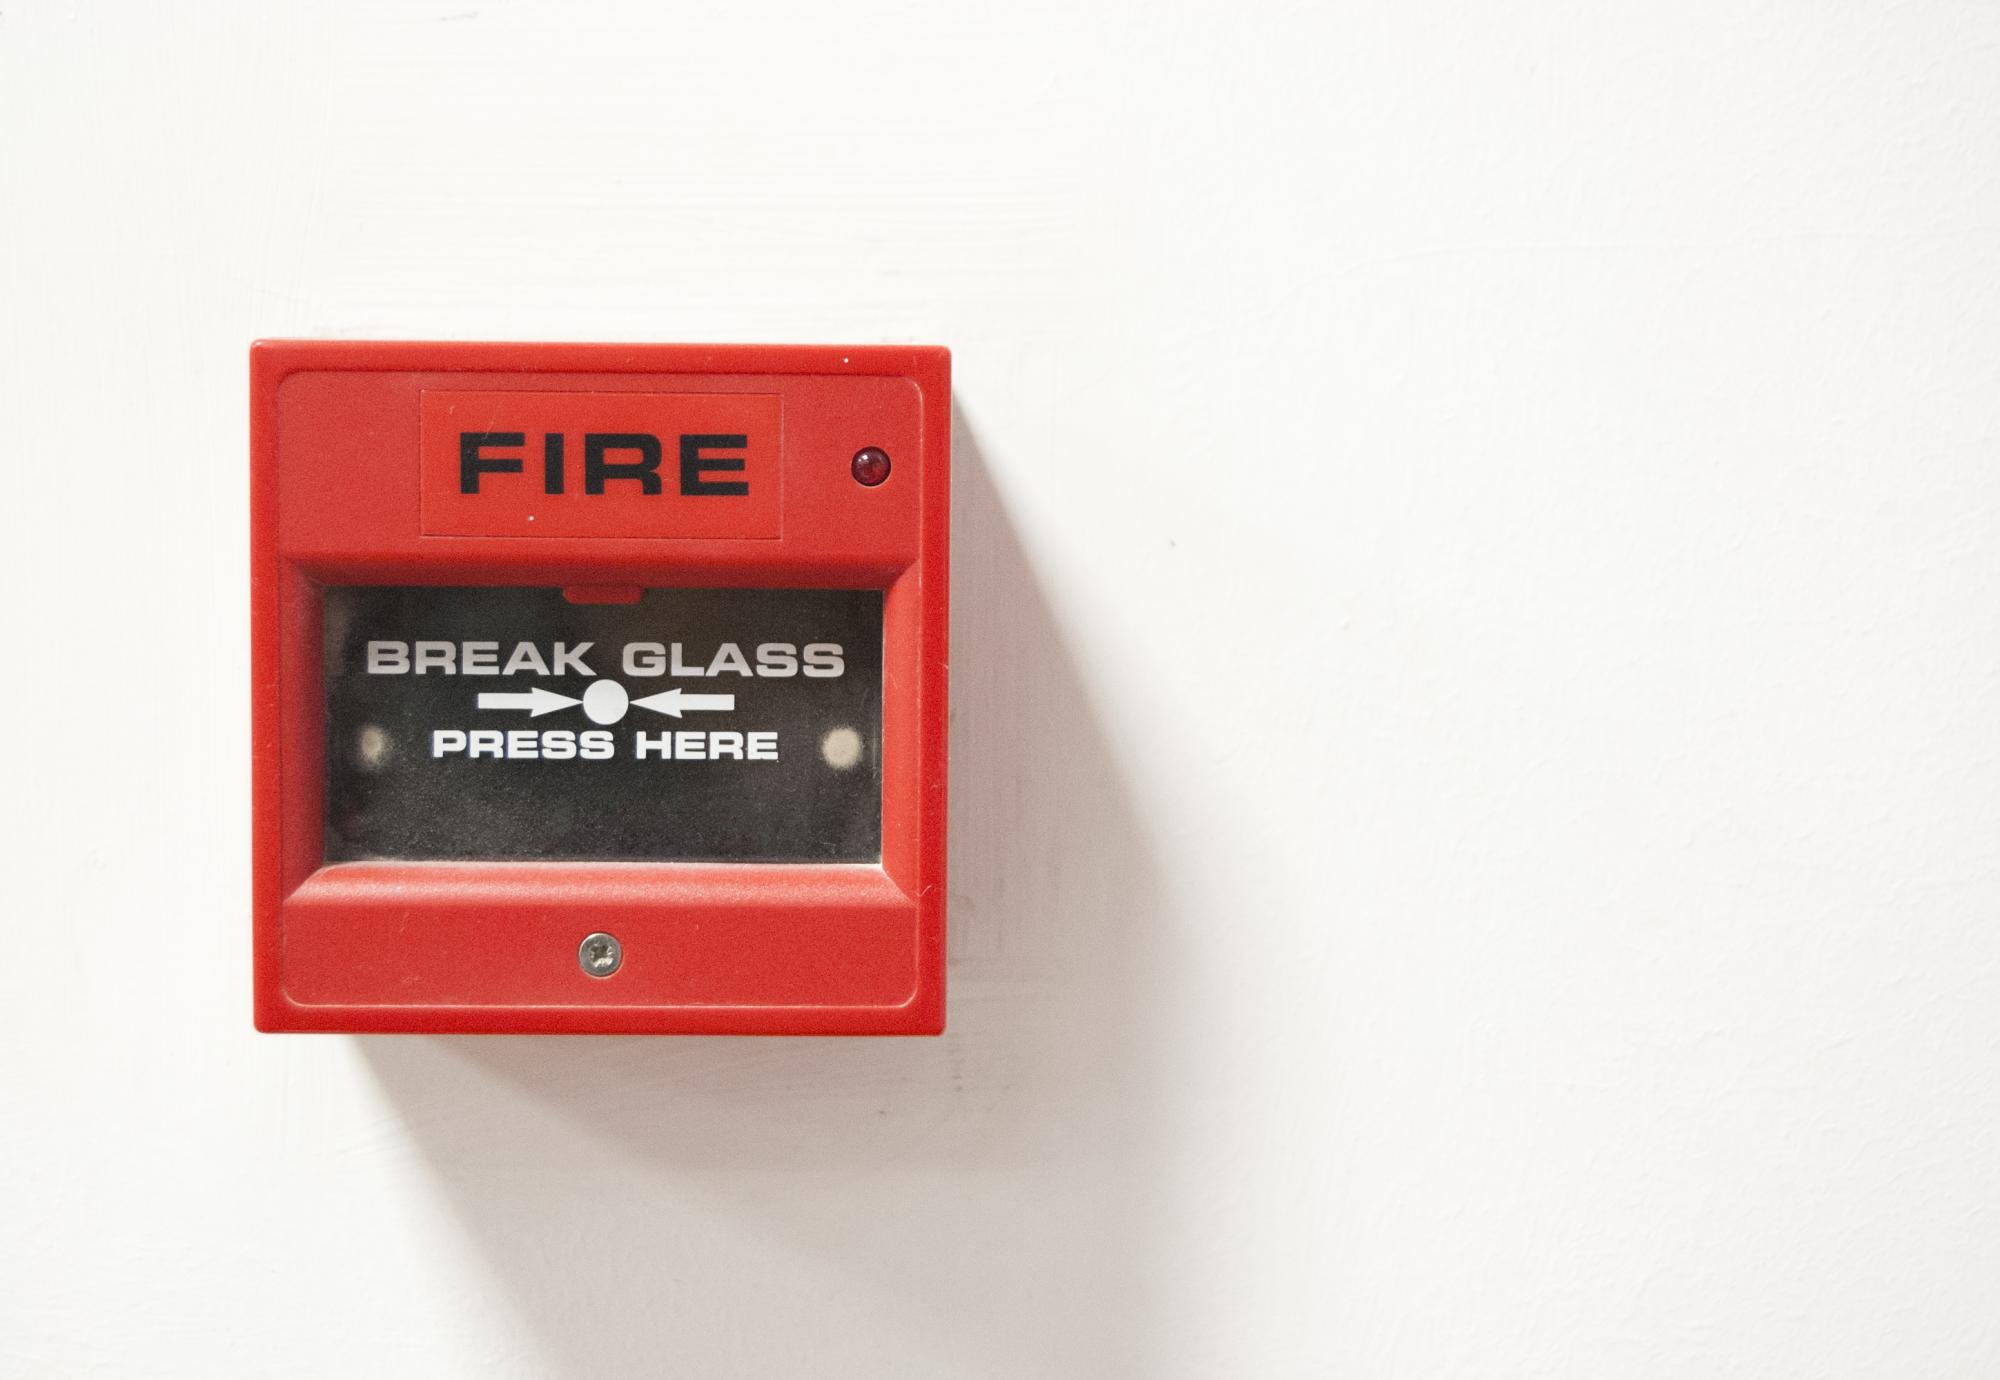 Fire alarm sits on wall ready to be activated. 